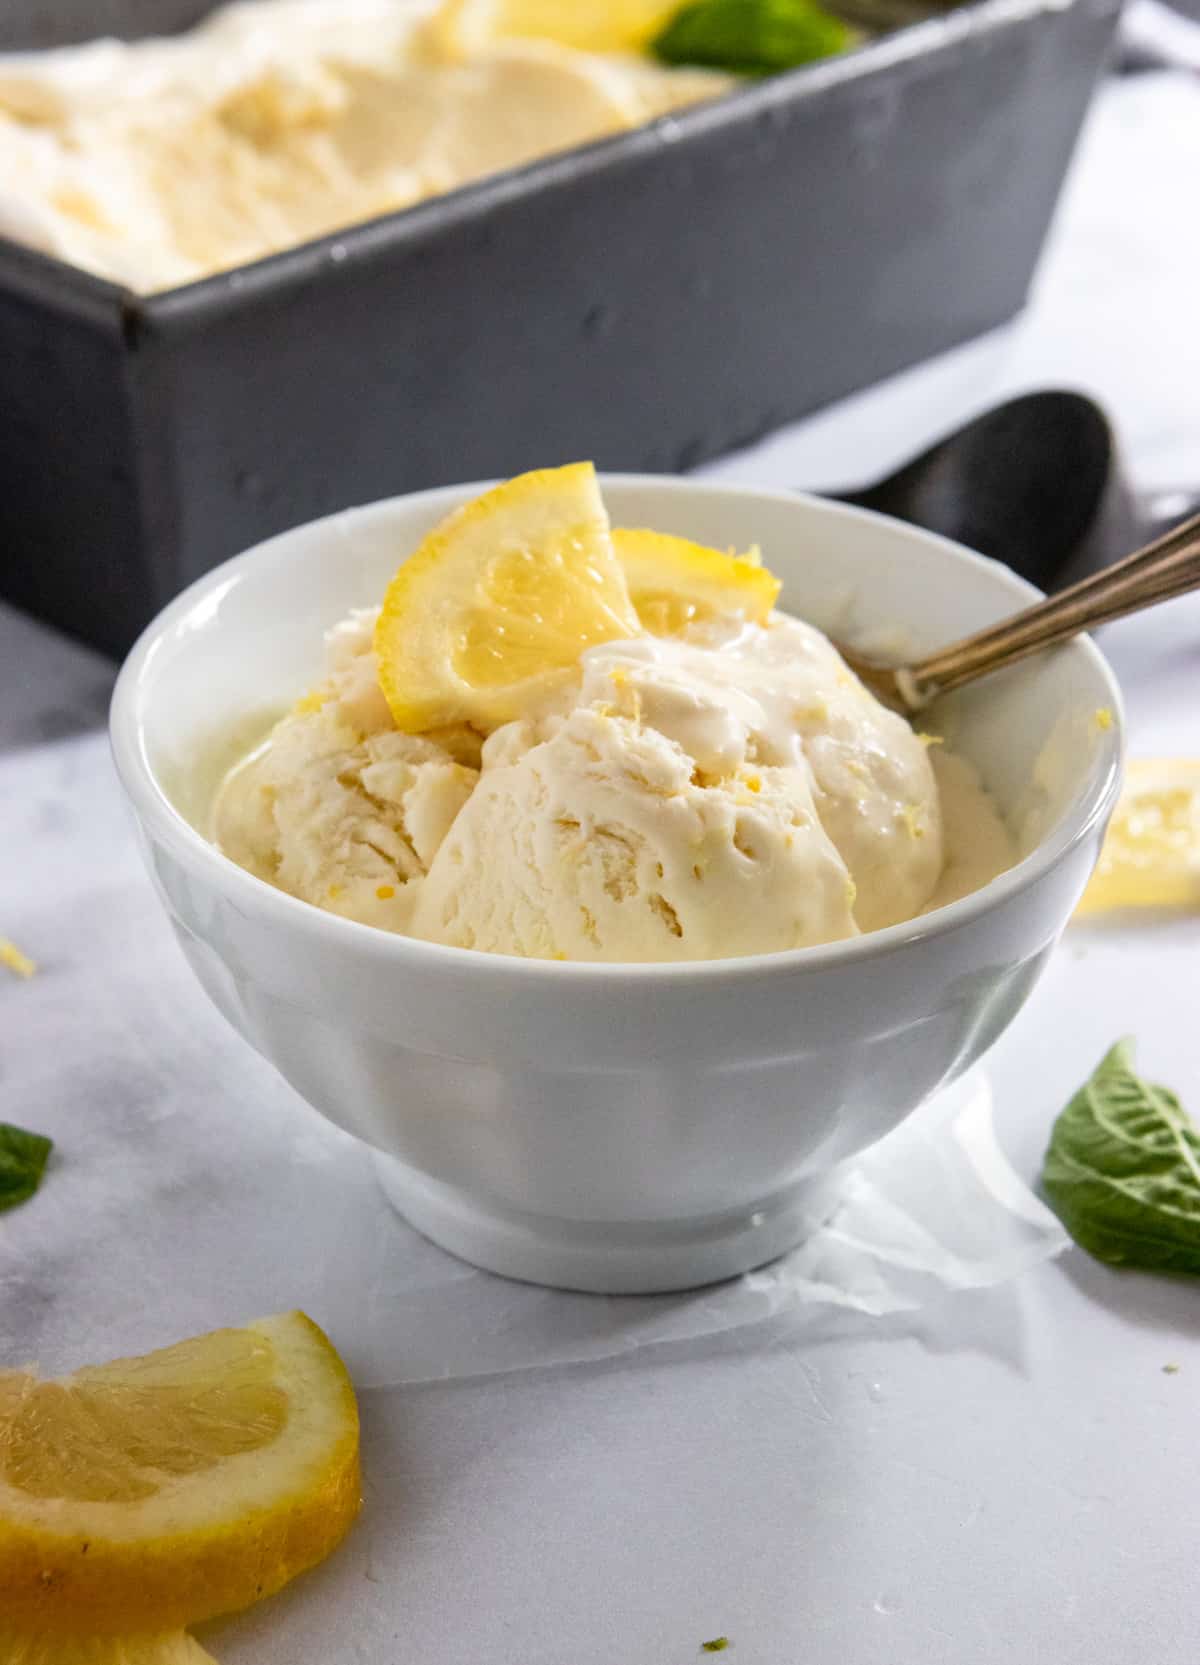 Scoop of homemade lemon ice cream in white bowl with spoon.